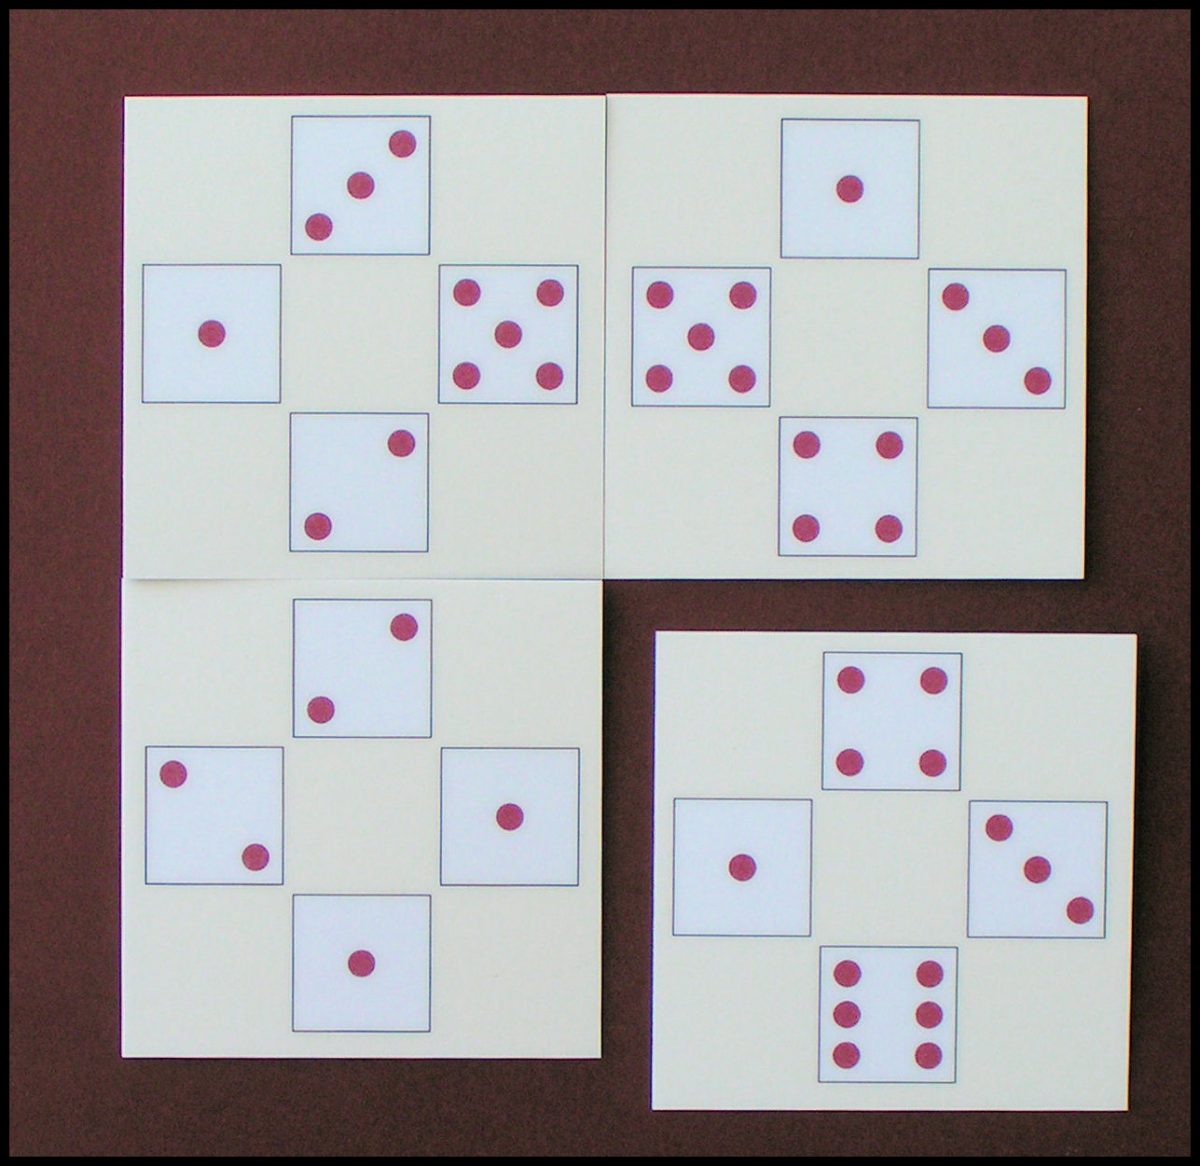 Quadominoes - A Five-Point Tile Play